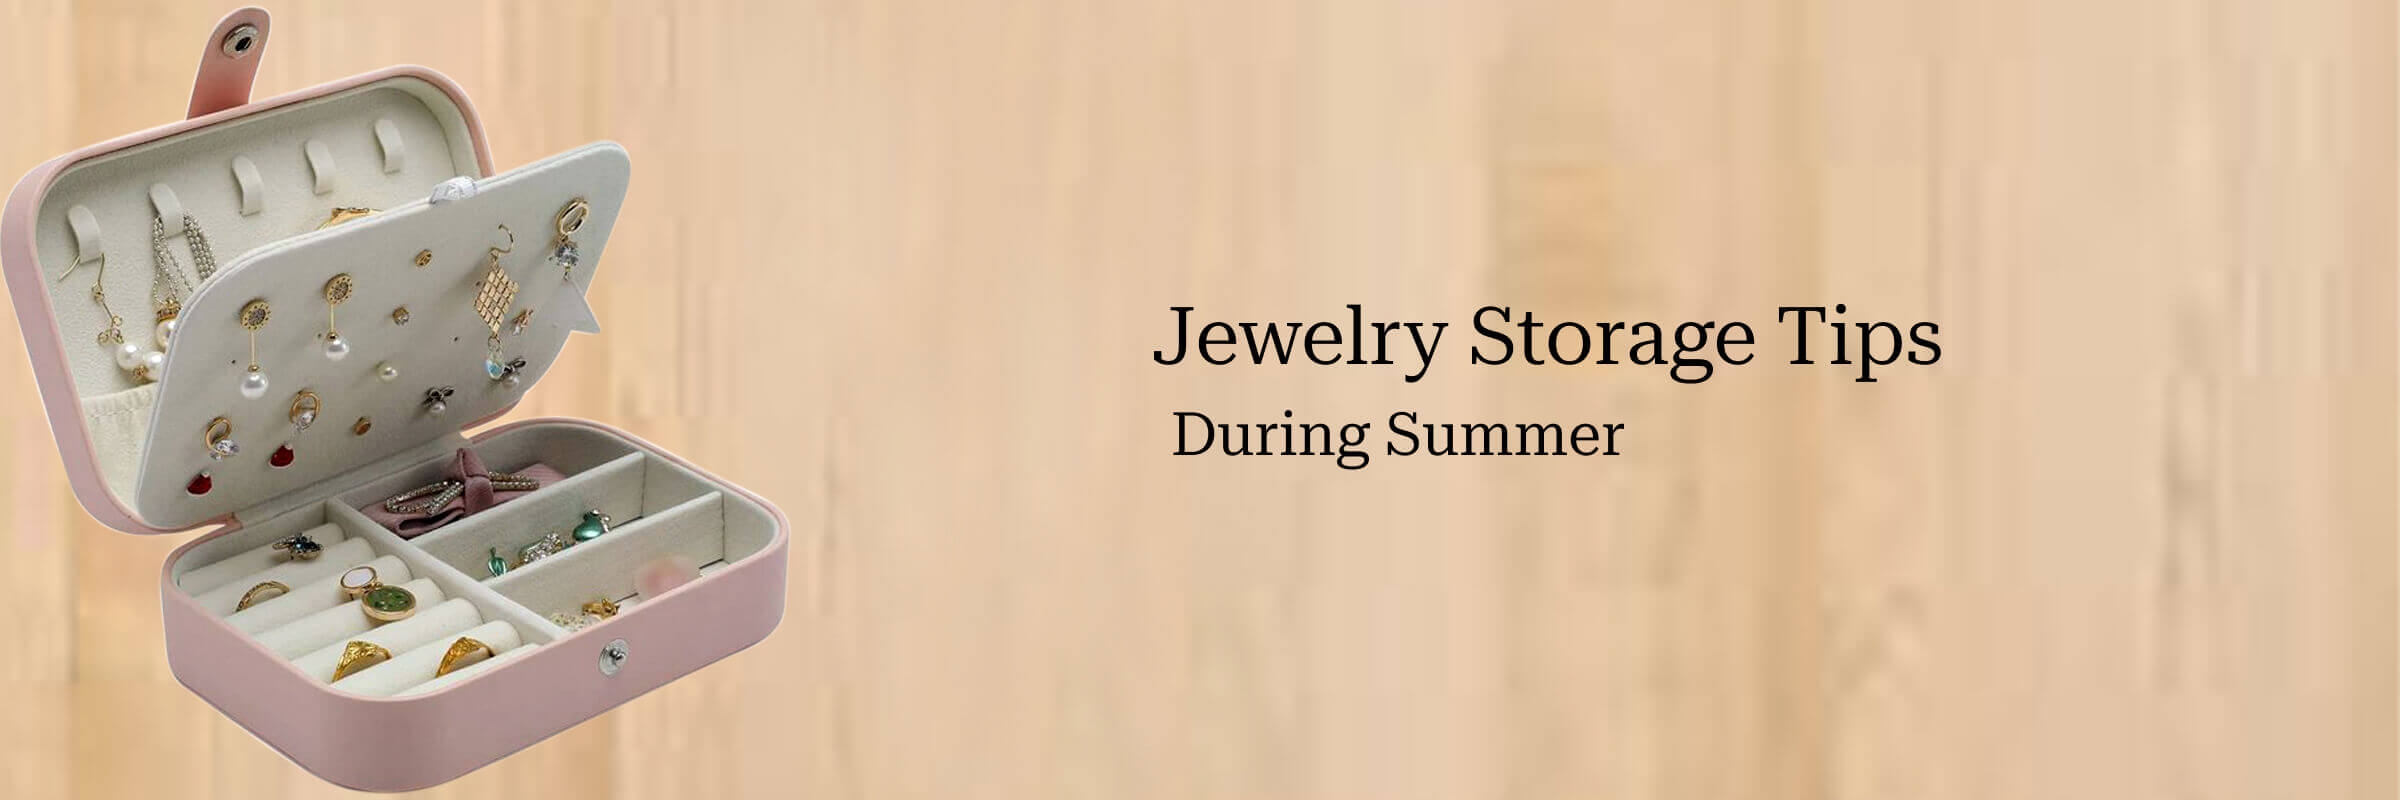 Jewelry Cleaning Tips During Summer